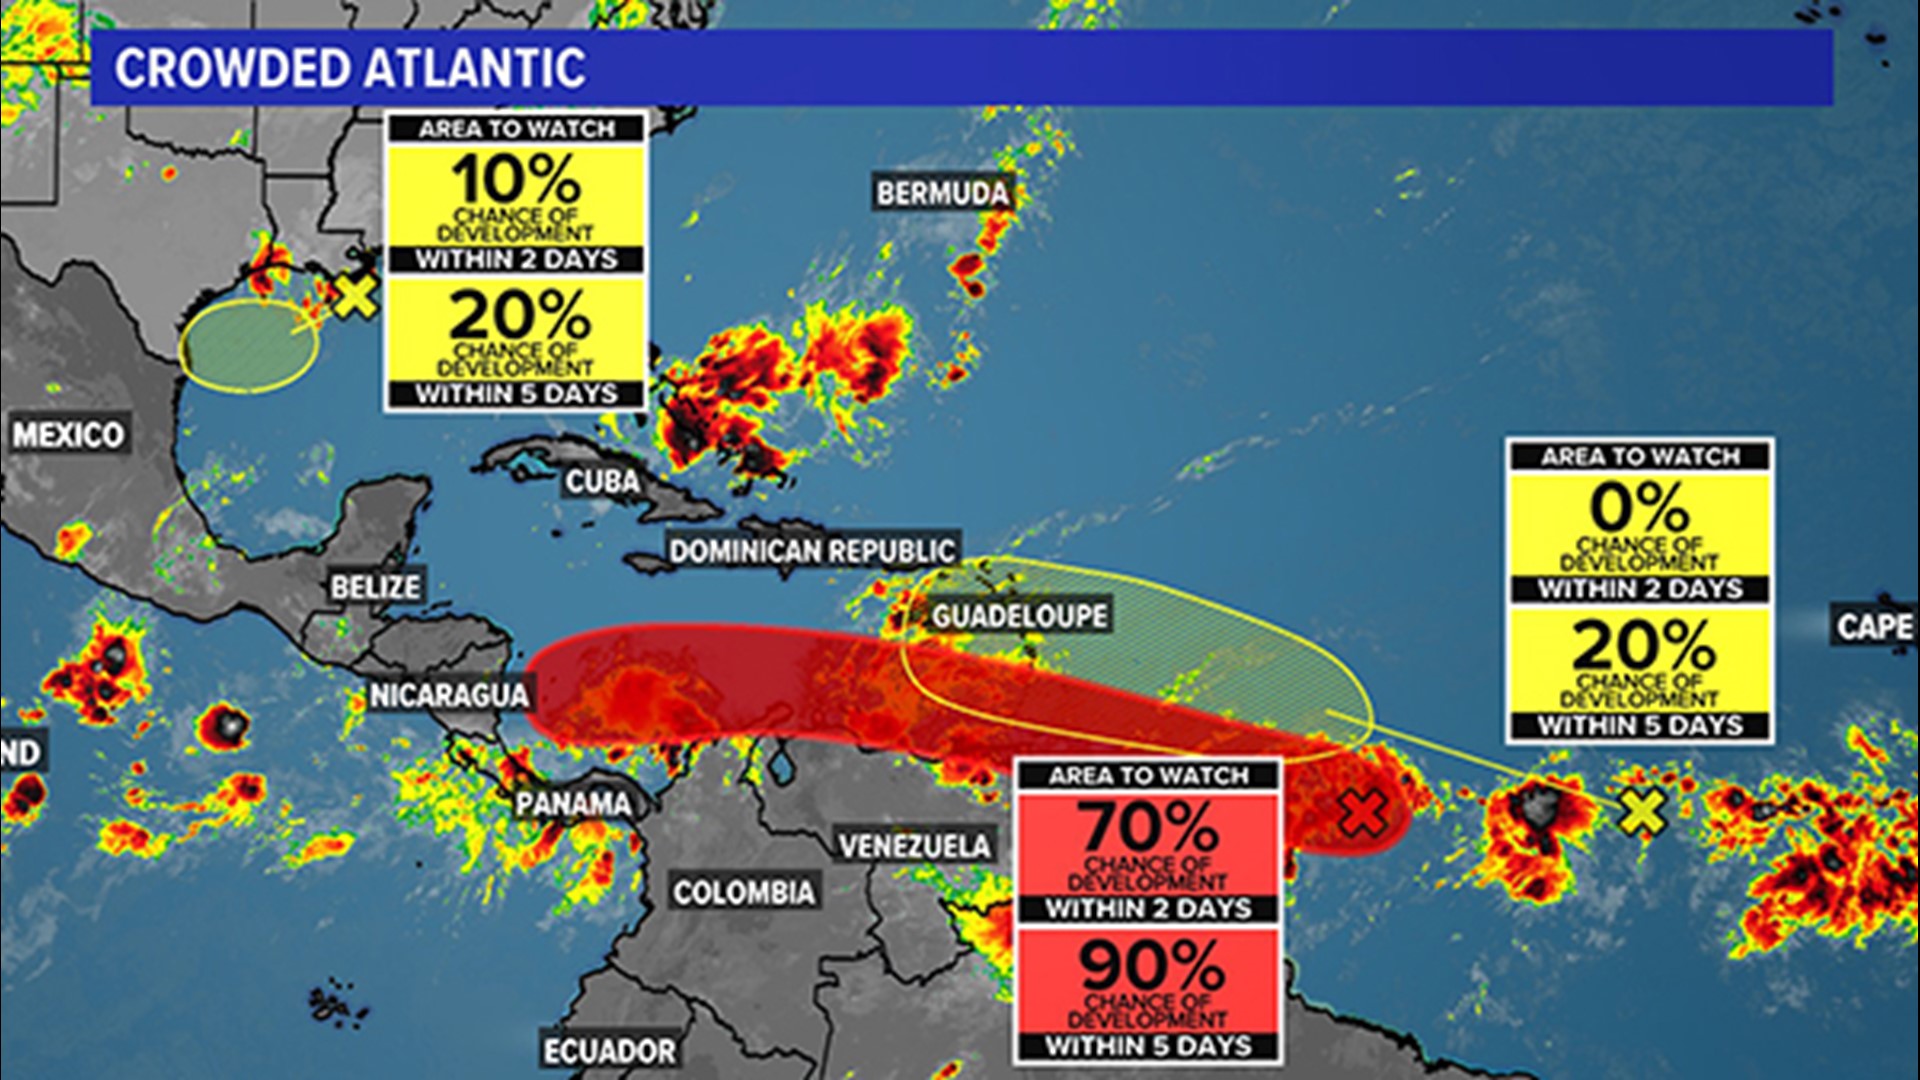 There are three different systems in the tropics that we're keeping an eye on, including one that could have an impact on our weather this week.